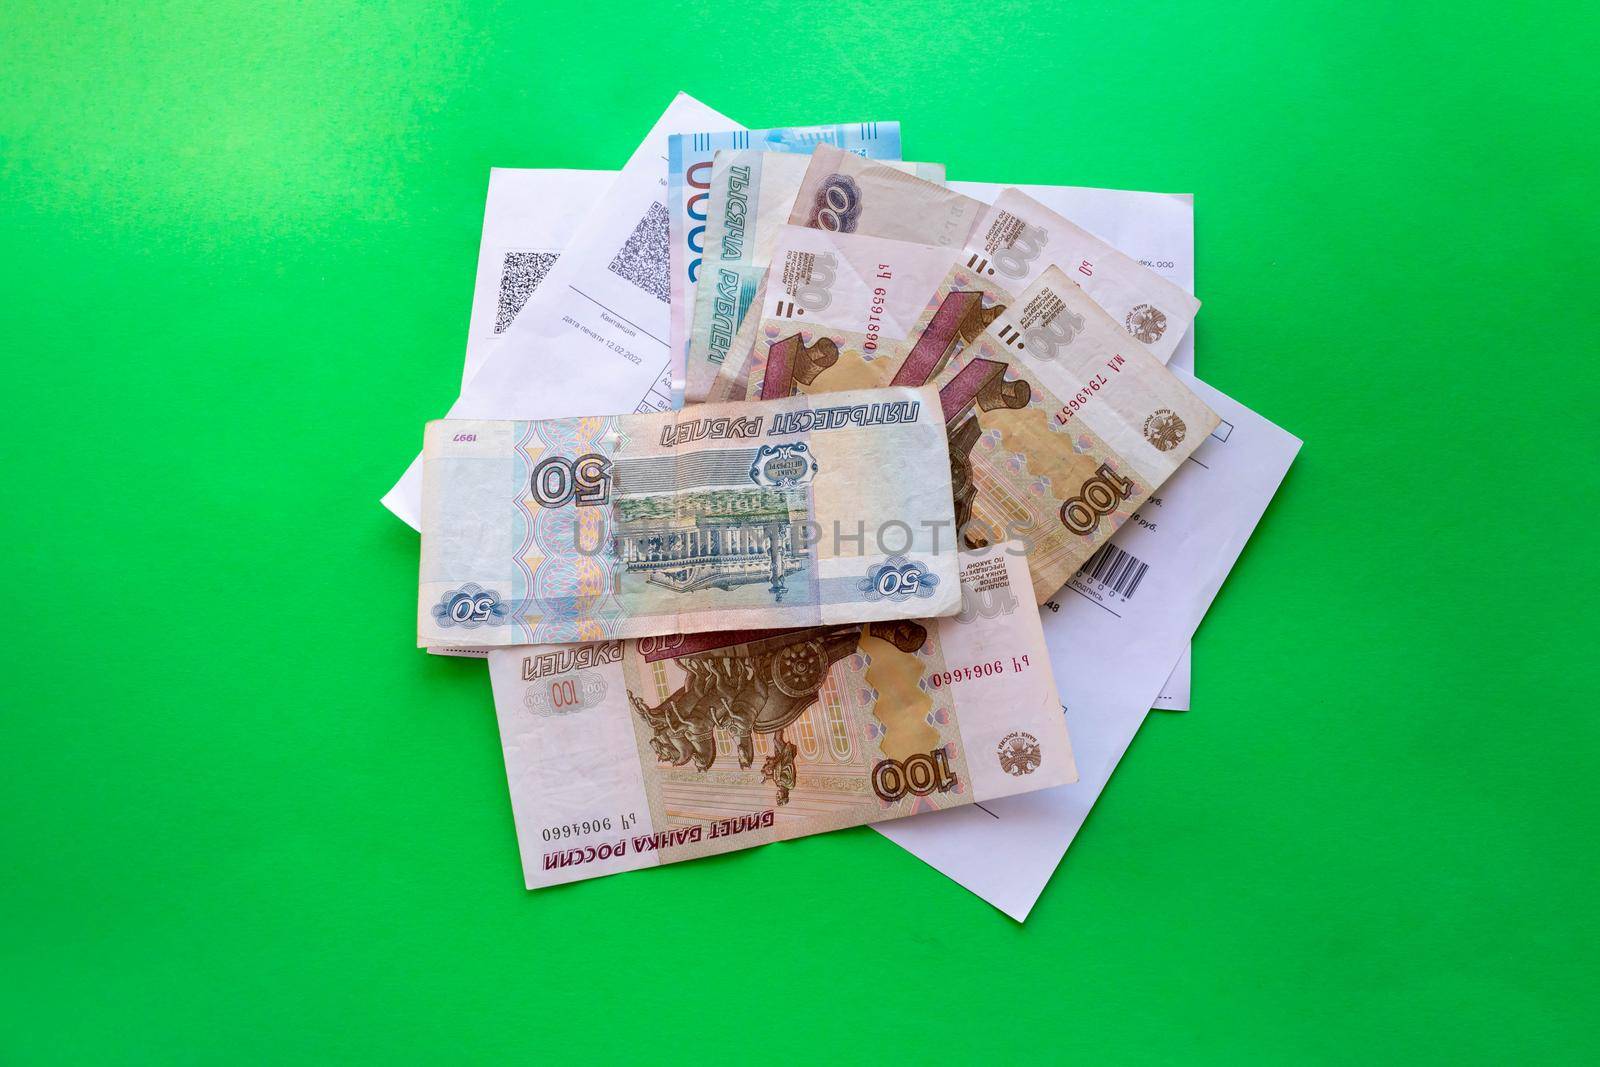 There is a stack of Russian banknotes on the receipts. A bundle of Russian money on a green background.